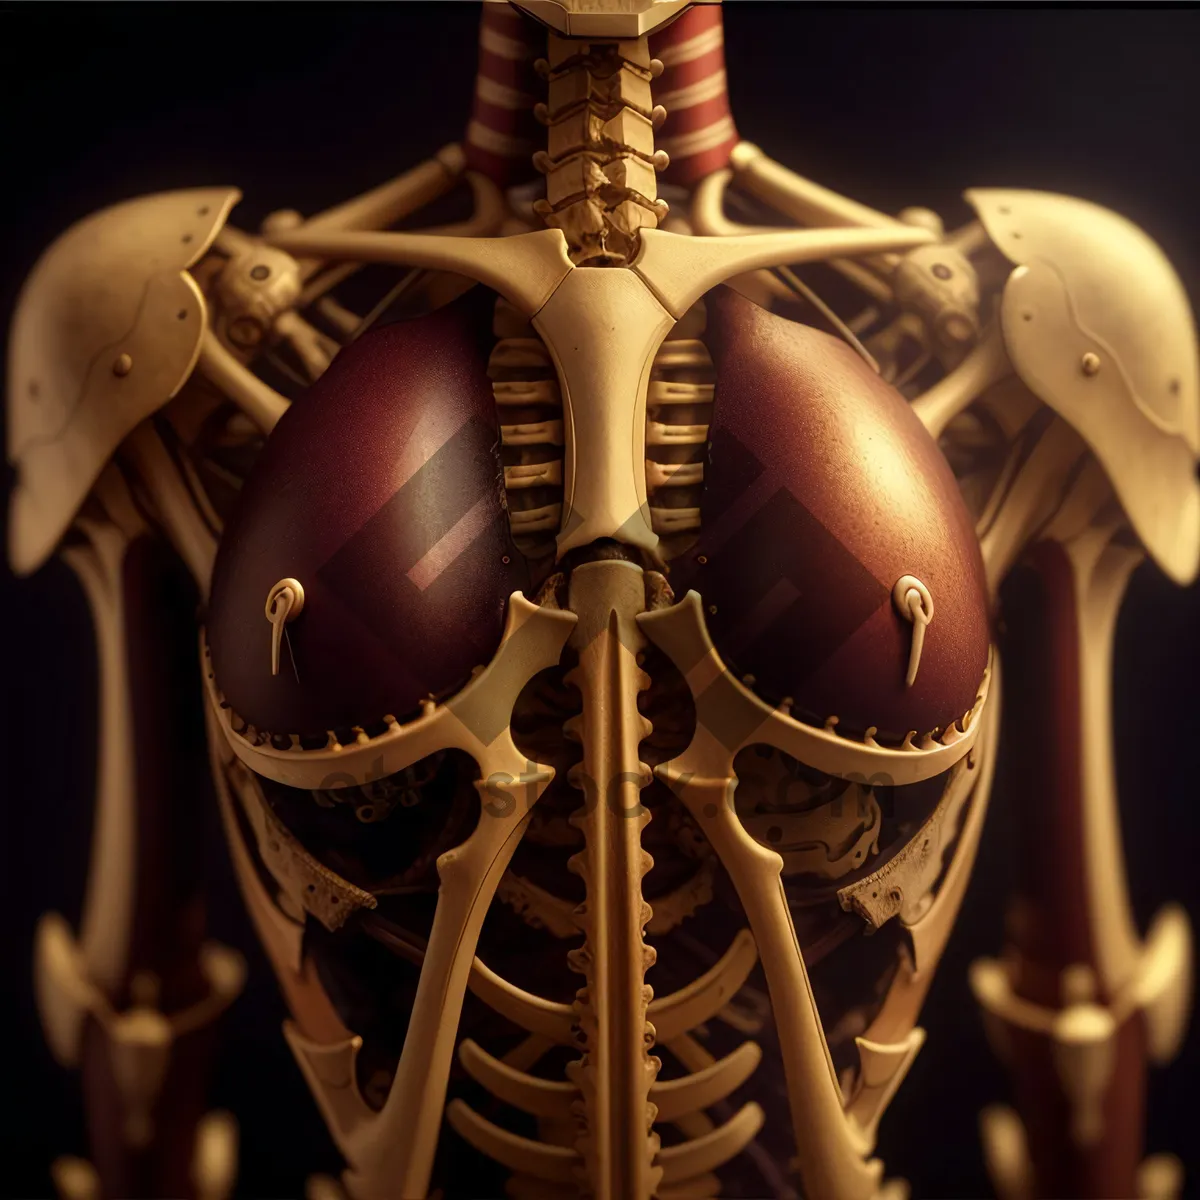 Picture of Anatomical Skeleton Body Armor Protection: 3D X-Ray Image